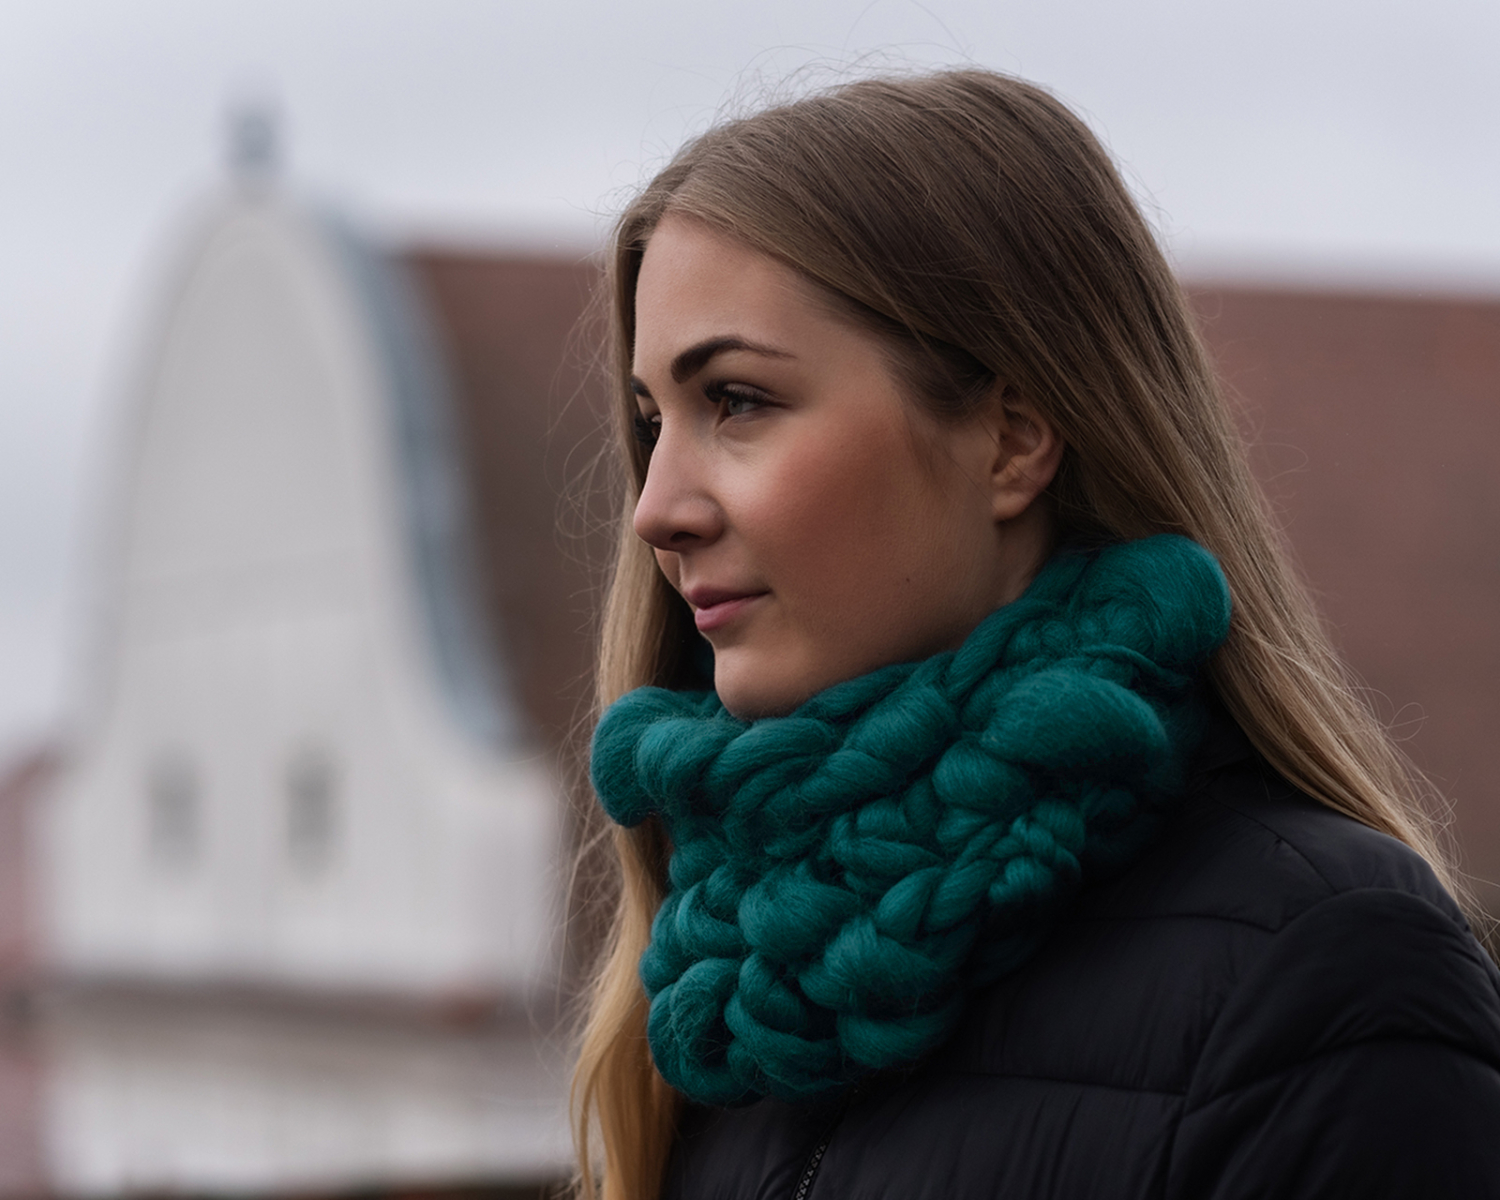 Petrol Green Chunky Knitted Infinity Scarf